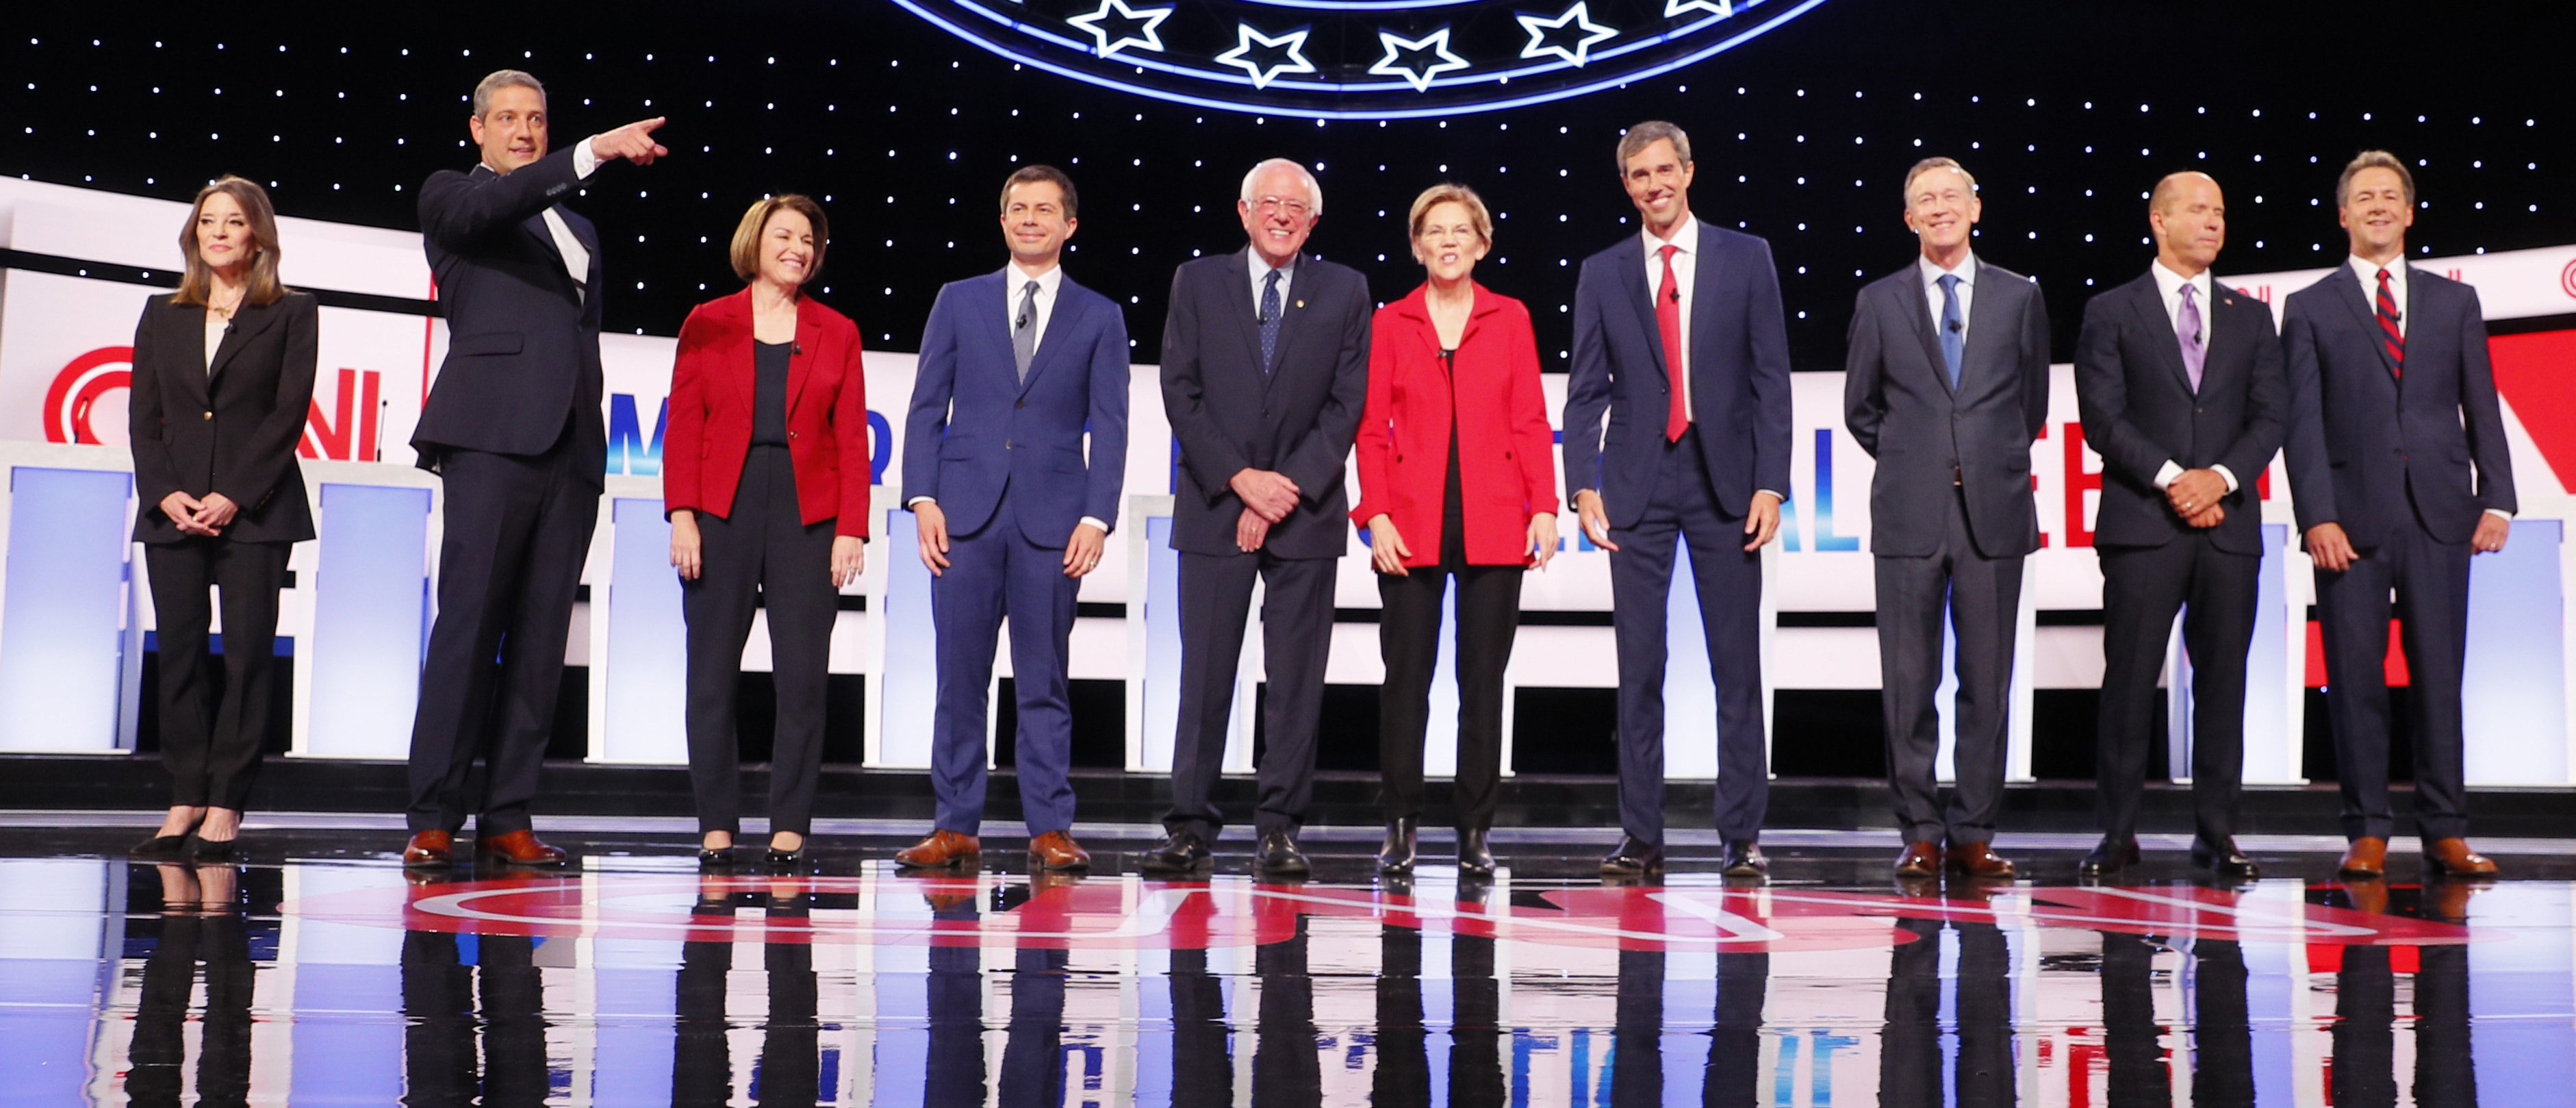 Here Are The Highlights From The Democratic Debates: Round 2, Night 1 | The Daily Caller